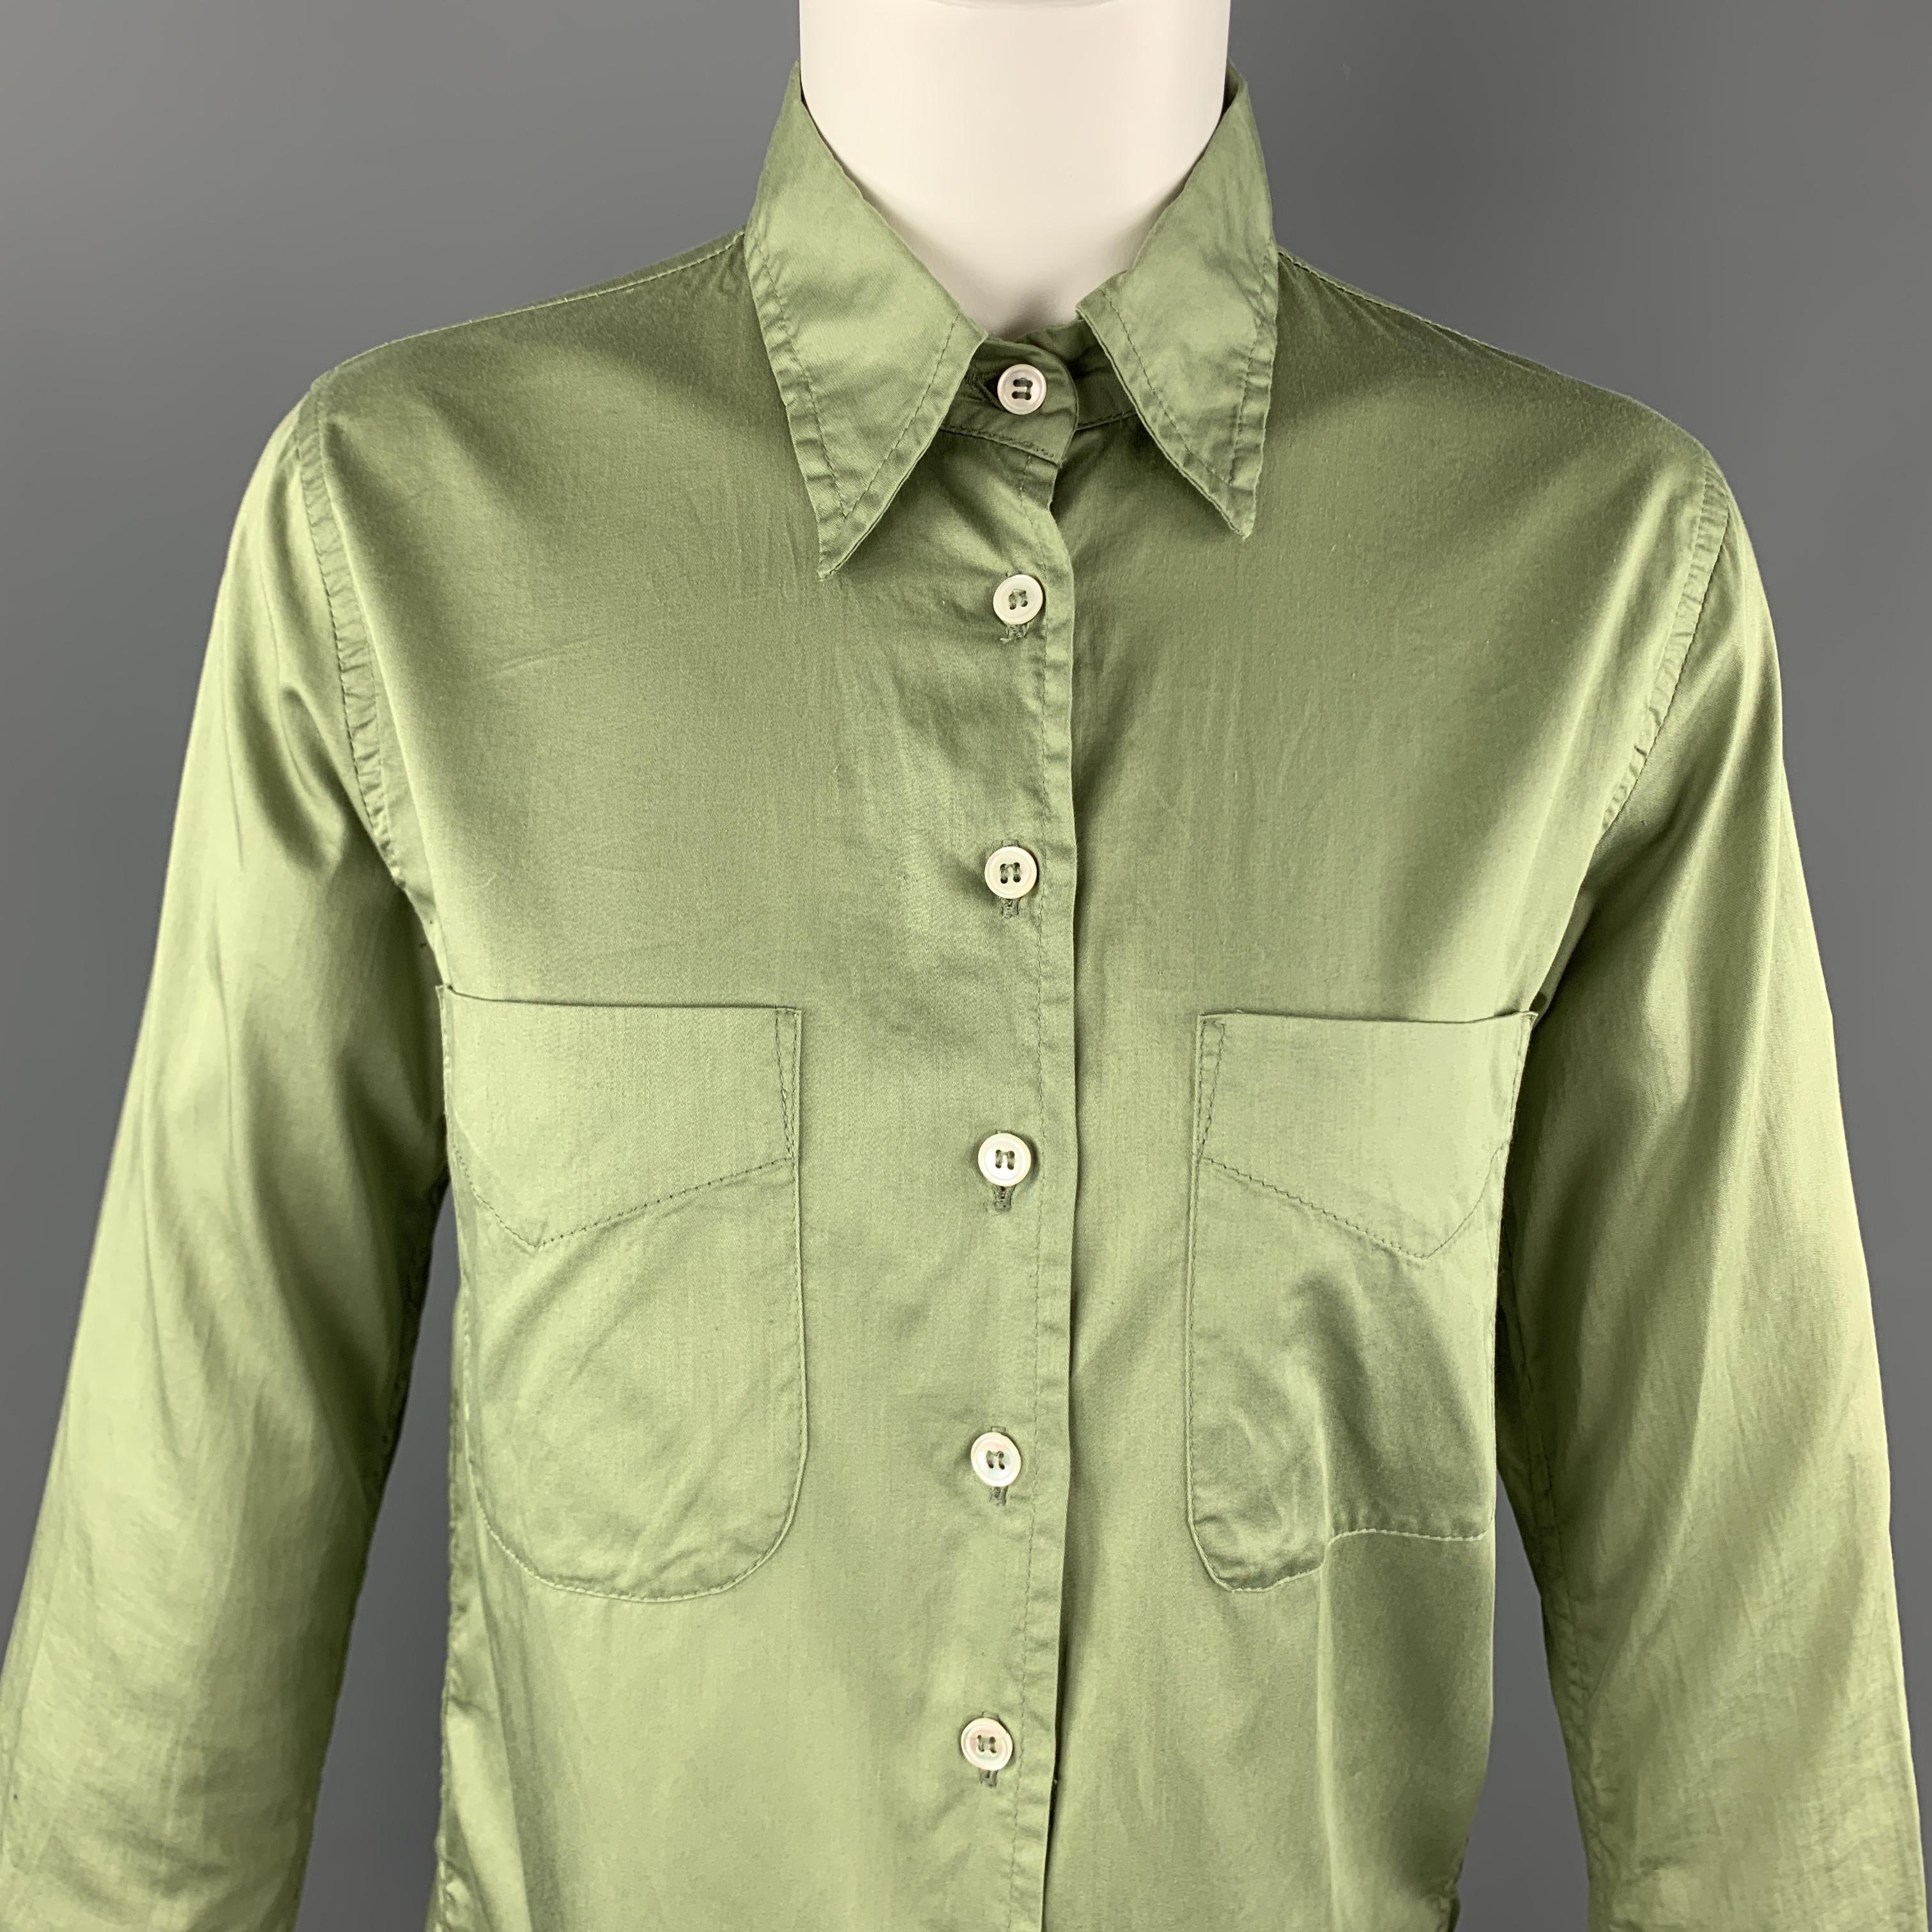 PAUL HARNDEN shirt comes in green cotton poplin with a pointed collar, and patch breast pockets.  Handmade in Scotland.

Very Good Pre-Owned Condition.
Marked: S

Measurements:

Shoulder: 16 in.
Bust: 36 in.
Sleeve: 22 in.
Length: 24 in.